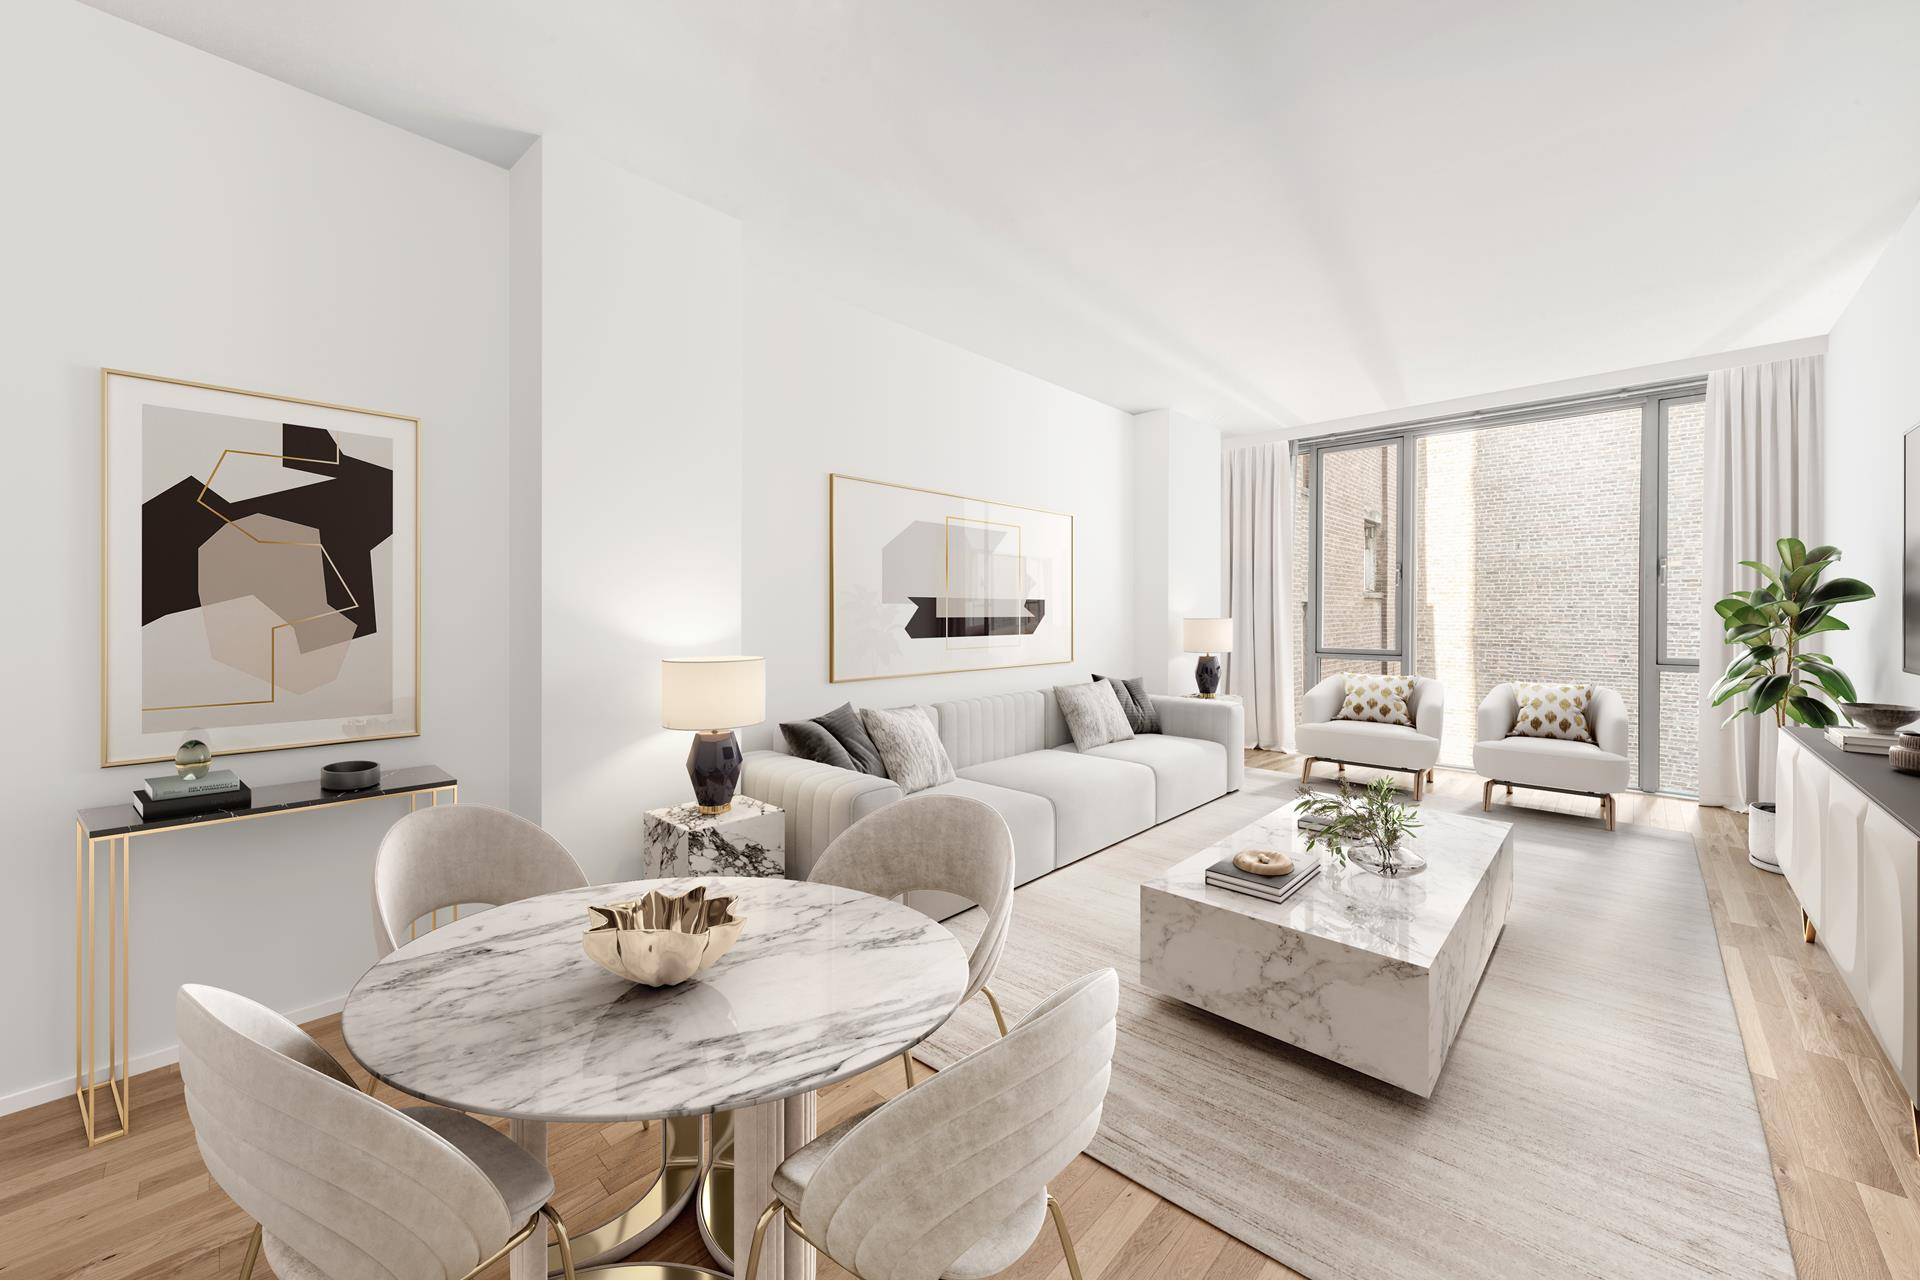 Welcome to 3A ! This spacious sun filled apartment located where Union Square meets the East Village is the most desirable and optimal 2 bedroom, 2 bathroom layout in the ...